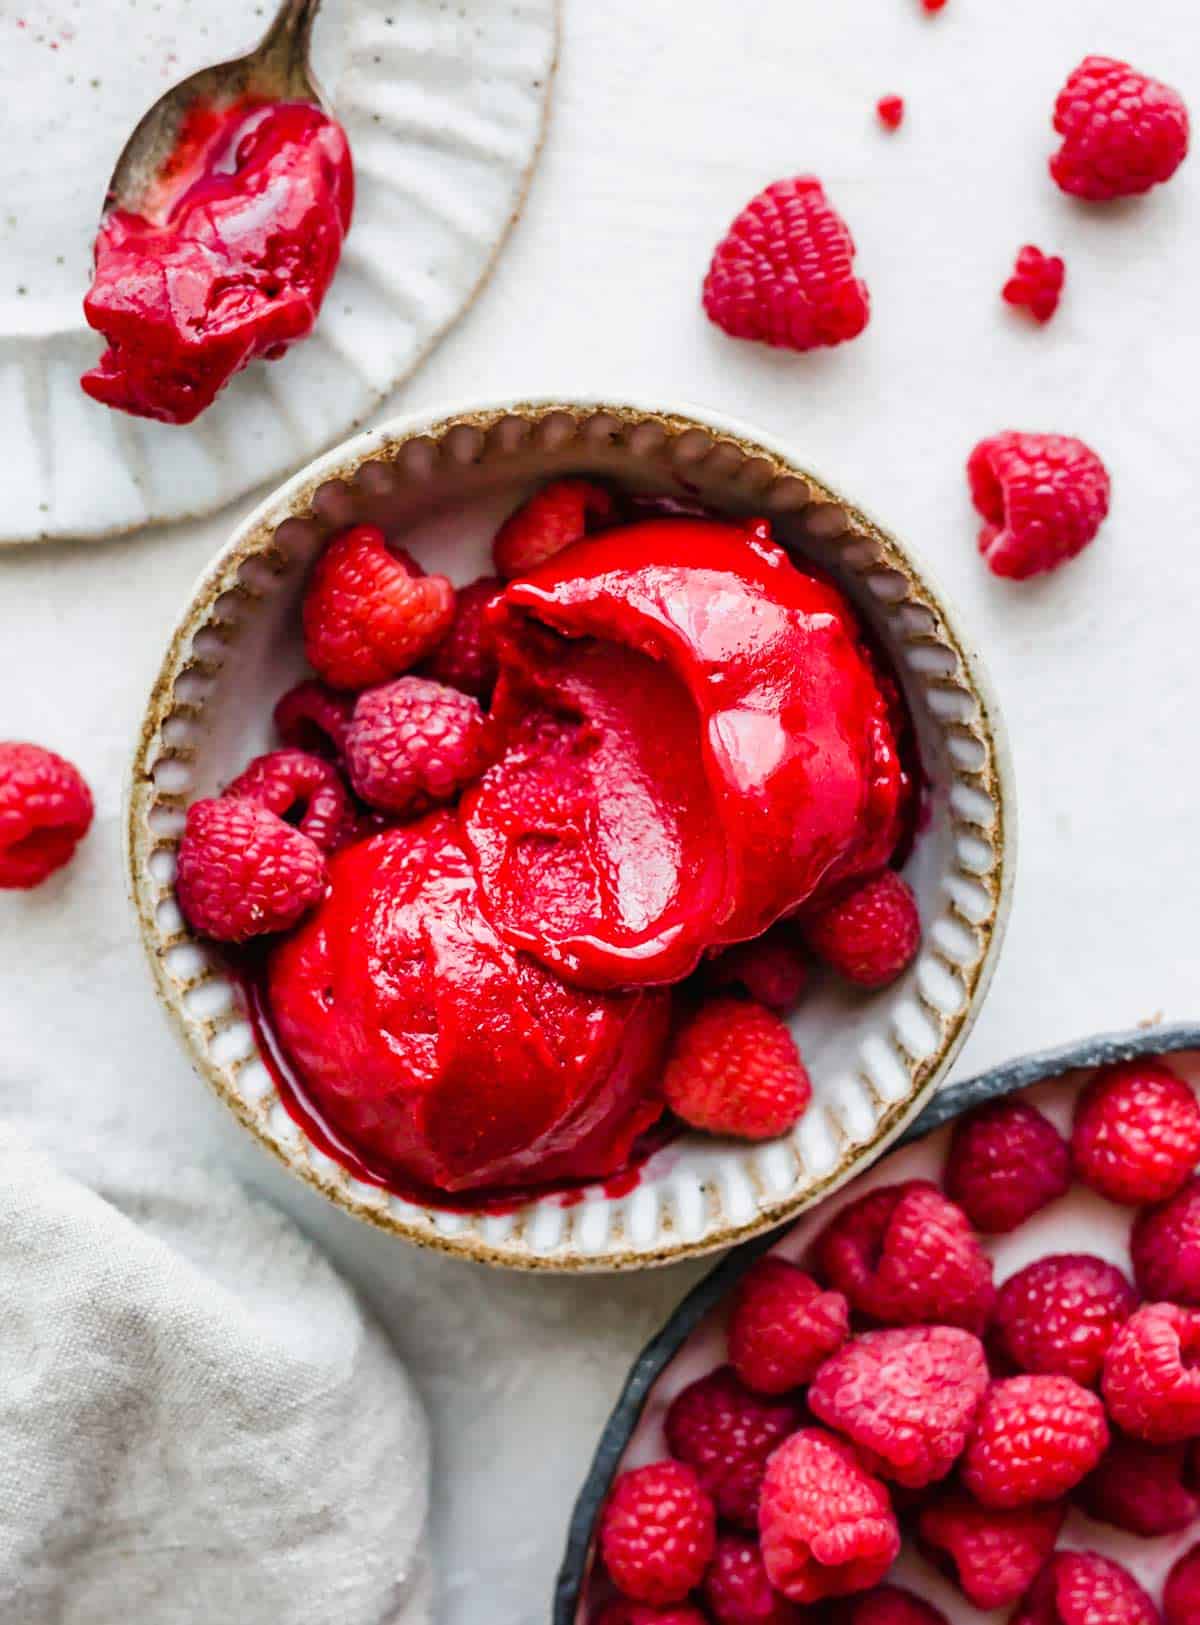 A bowl filled with bright red fresh Raspberry Sorbet on a white background.